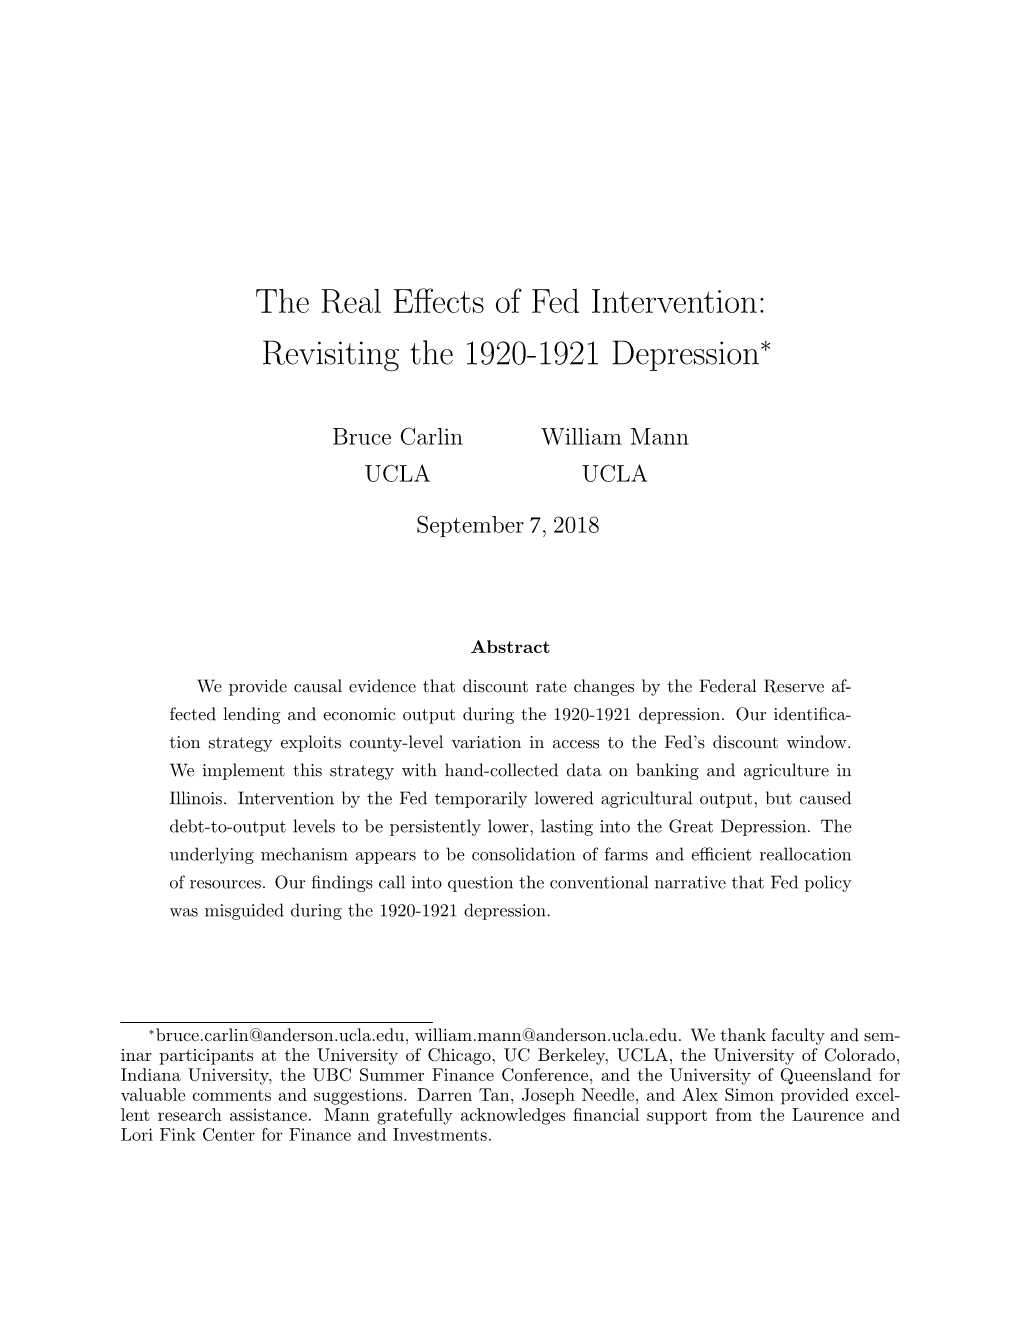 The Real Effects of Fed Intervention: Revisiting the 1920-1921 Depression